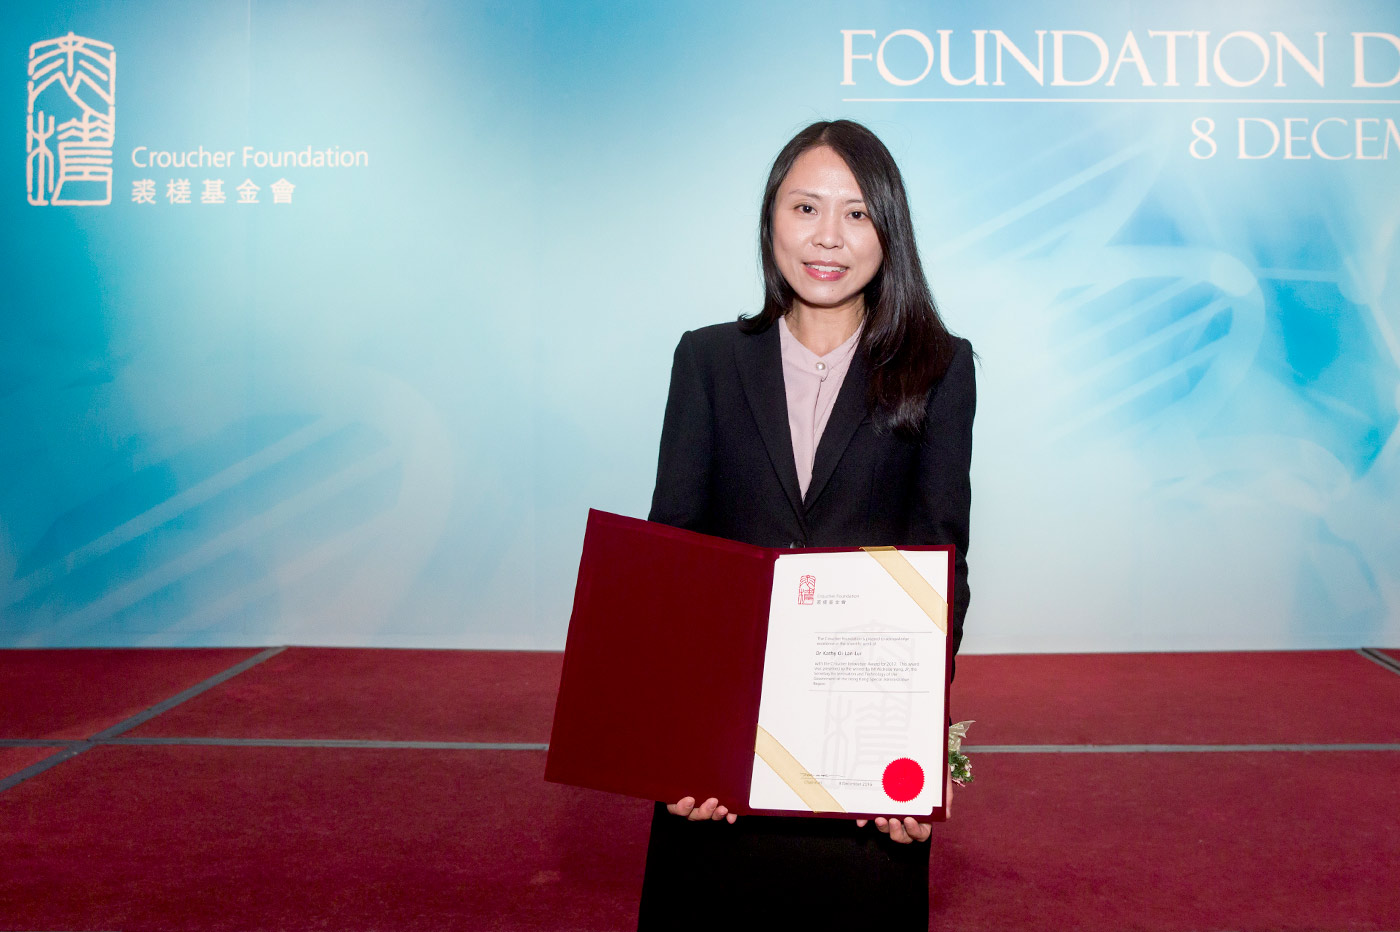 Professor Lui receives the Croucher Innovation Award 2017, for her distinguished accomplishment in the international scientific community